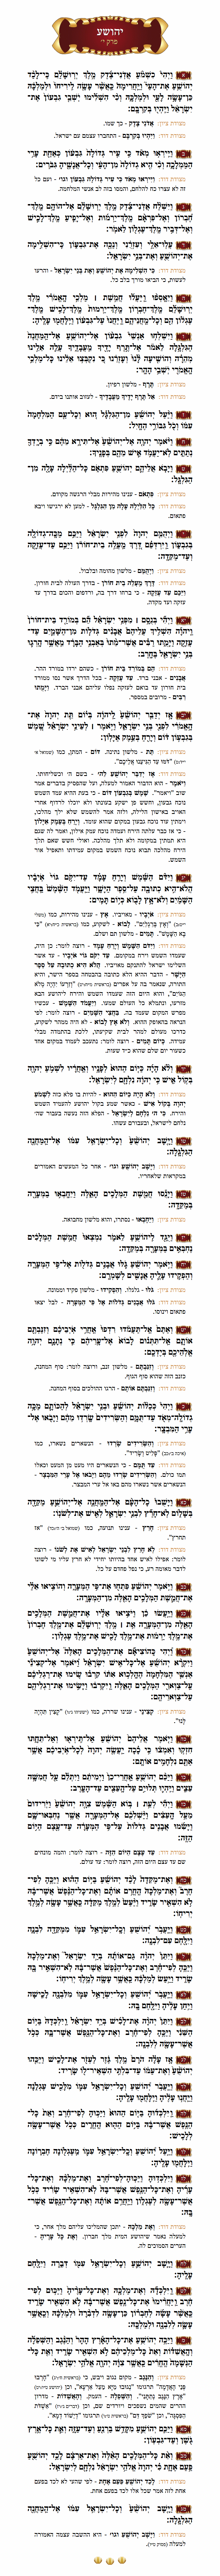 Sefer Yehoshua Chapter 10 with commentary